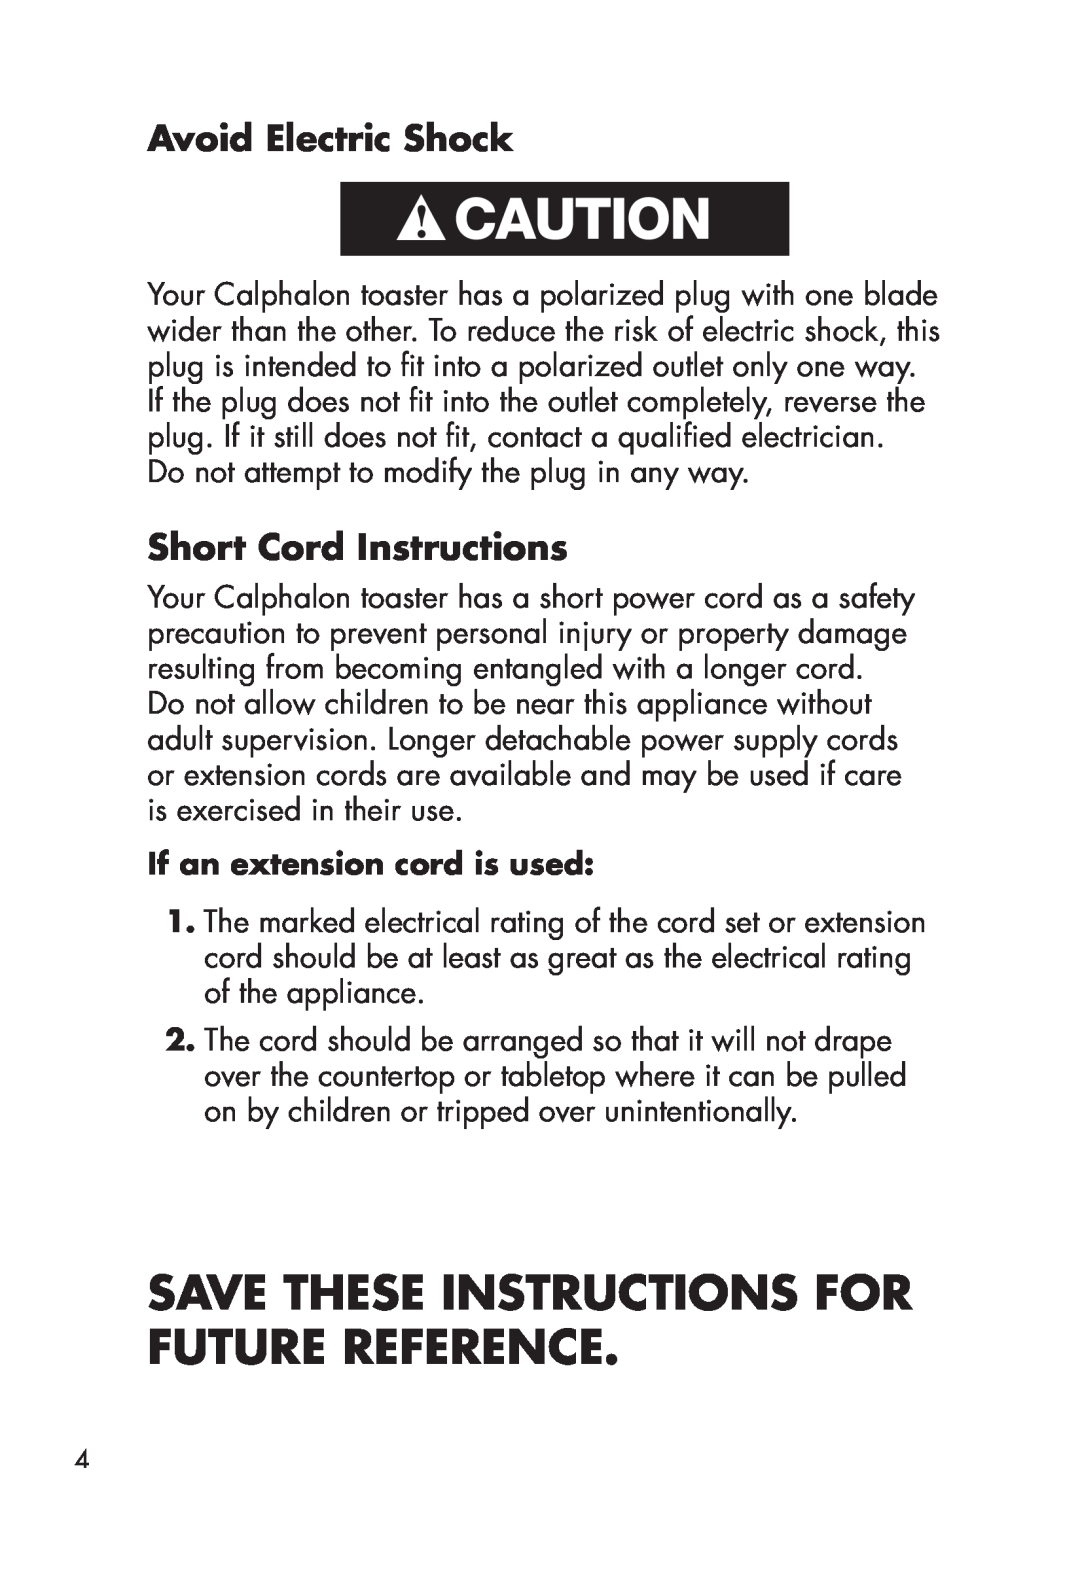 Calphalon 1779207, 1779206 Avoid Electric Shock, Short Cord Instructions, Save These Instructions For Future Reference 